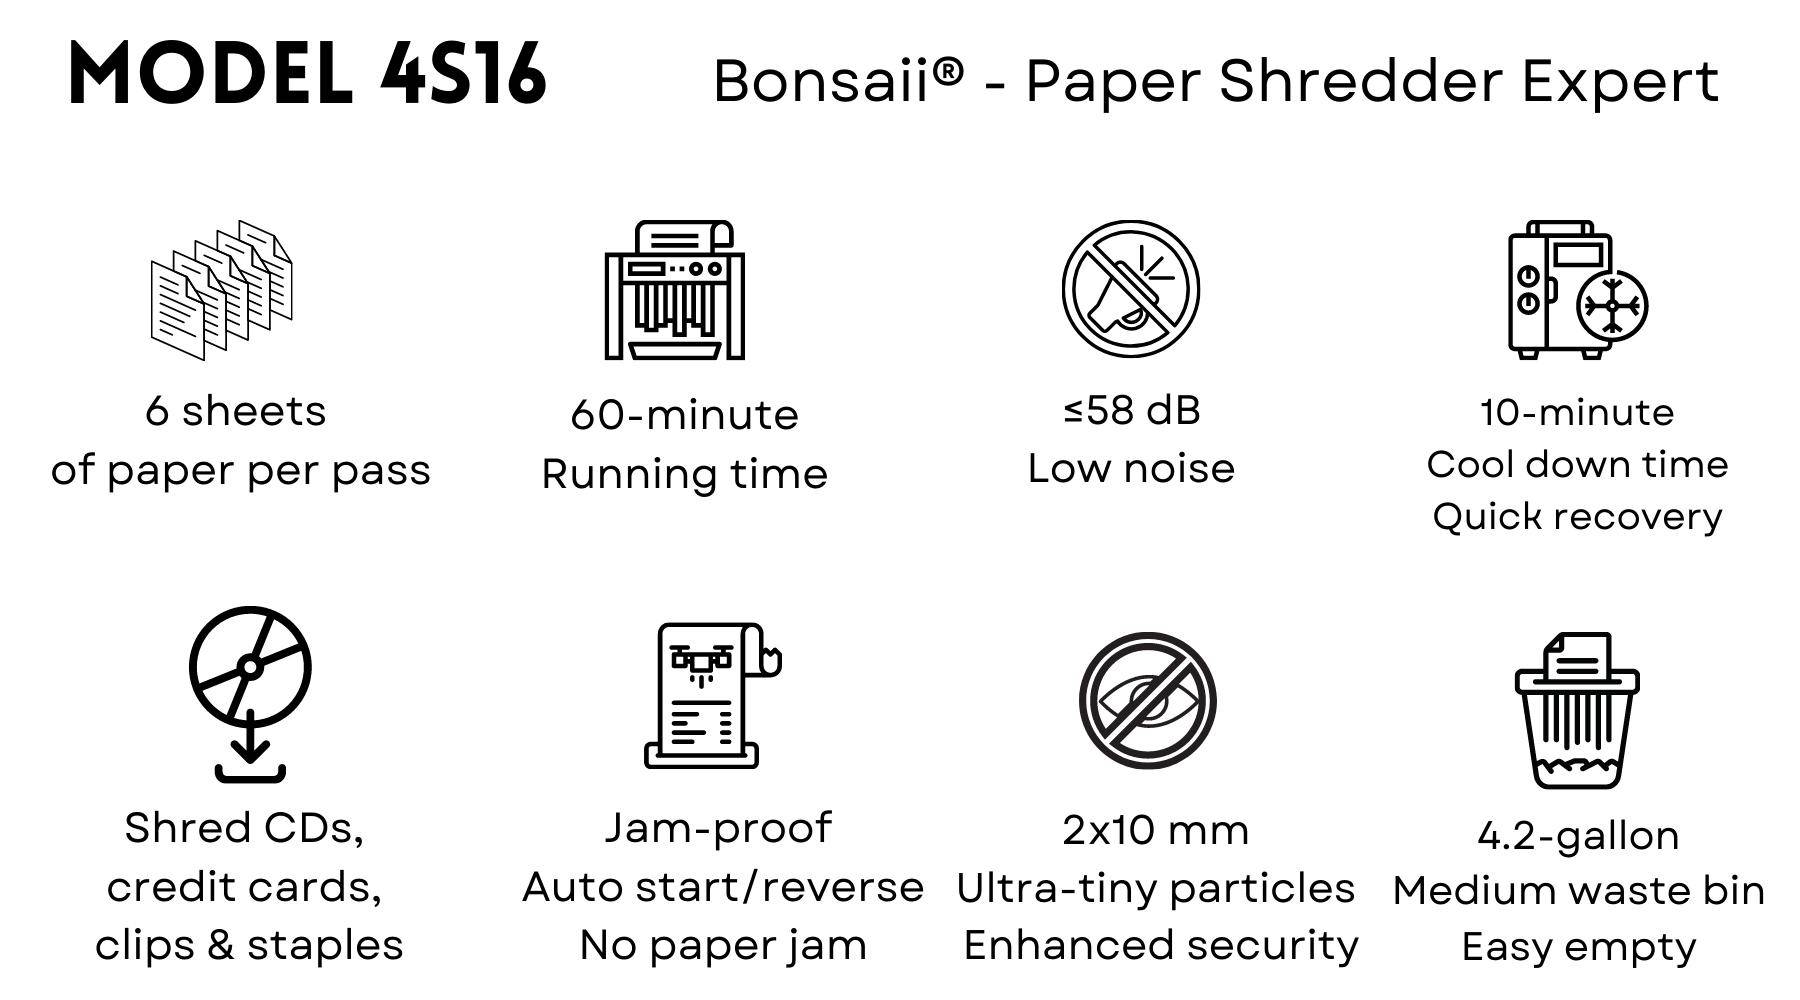 Bonsaii 4S16 paper shredder helps people cut paper into tiny fine particles. Government organizations, businesses, and private individuals use shredders to destroy private, confidential, or otherwise sensitive documents.  Shredding paper helps to keep us in compliance with the law, to protect forests, to prevent identity theft, and to rid clutter and fire hazards. They provide a Confidential Waste Disposal service and enable paper shredding, document shredding, document destruction and Shredders which are reliable and secure.  Shredders usually either cut the paper into strips or confetti-like squares. When paper (or another object) touches the cutting head, a sensor activates and the sharp teeth or knives rotate and pull the paper into their jaws until the paper lies pathetically in pieces in the bin.  Bonsaii 4S16 paper shredder's main features:  Run continuously for up to 60 minutes with a 9-minute cooldown time Shreds 6 sheets per pass into 5/64'' X 25/64'' (2mm x 10mm) micro-cut particles (Security Level P-5)  Shreds credit cards, CDs, staples and small paper clips as well  58dB low-noise offers you a quiet and smooth shredding experience  Jam protection system with auto start and auto reverse to avoid the frustration of paper jams  Overheating and overloading protection technology to help maintain your shredder and extend its lifespan Removable and lockable casters for easy mobility  4.2-gallon pull-out bin for shreds with a 0.37-gallons separate small bin for CD and credit card pieces collection, the transparent window makes it easy to see when to empty the bin Patented air cooling system help decrease the risk of overheat  Free shipping in the United States 30-day return, 36-month machine, 7-year cutter warranty Guaranteed safe checkout with Paypal and other trusted payments Specialized in manufacturing paper shredders since 2005